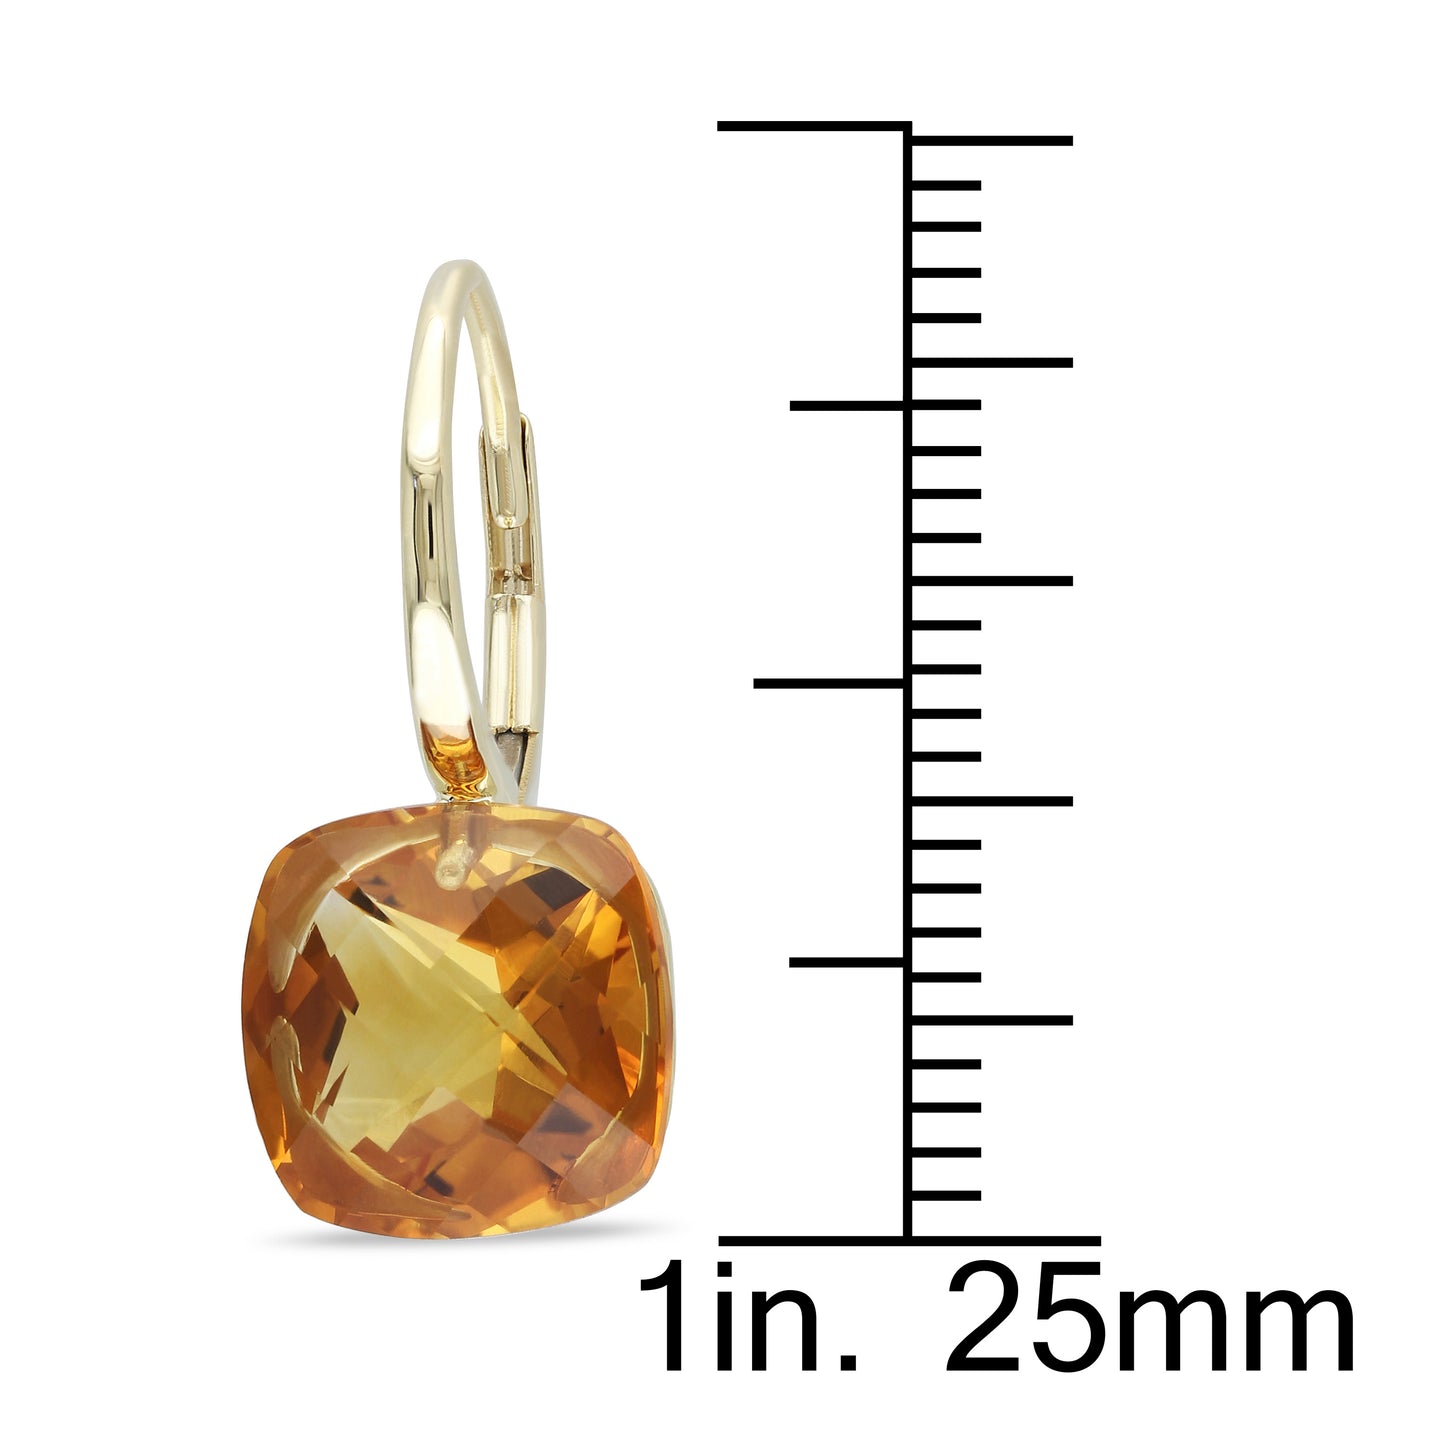 8ct Madeira Citrine LeverBack Earrings in 14k Yellow Gold